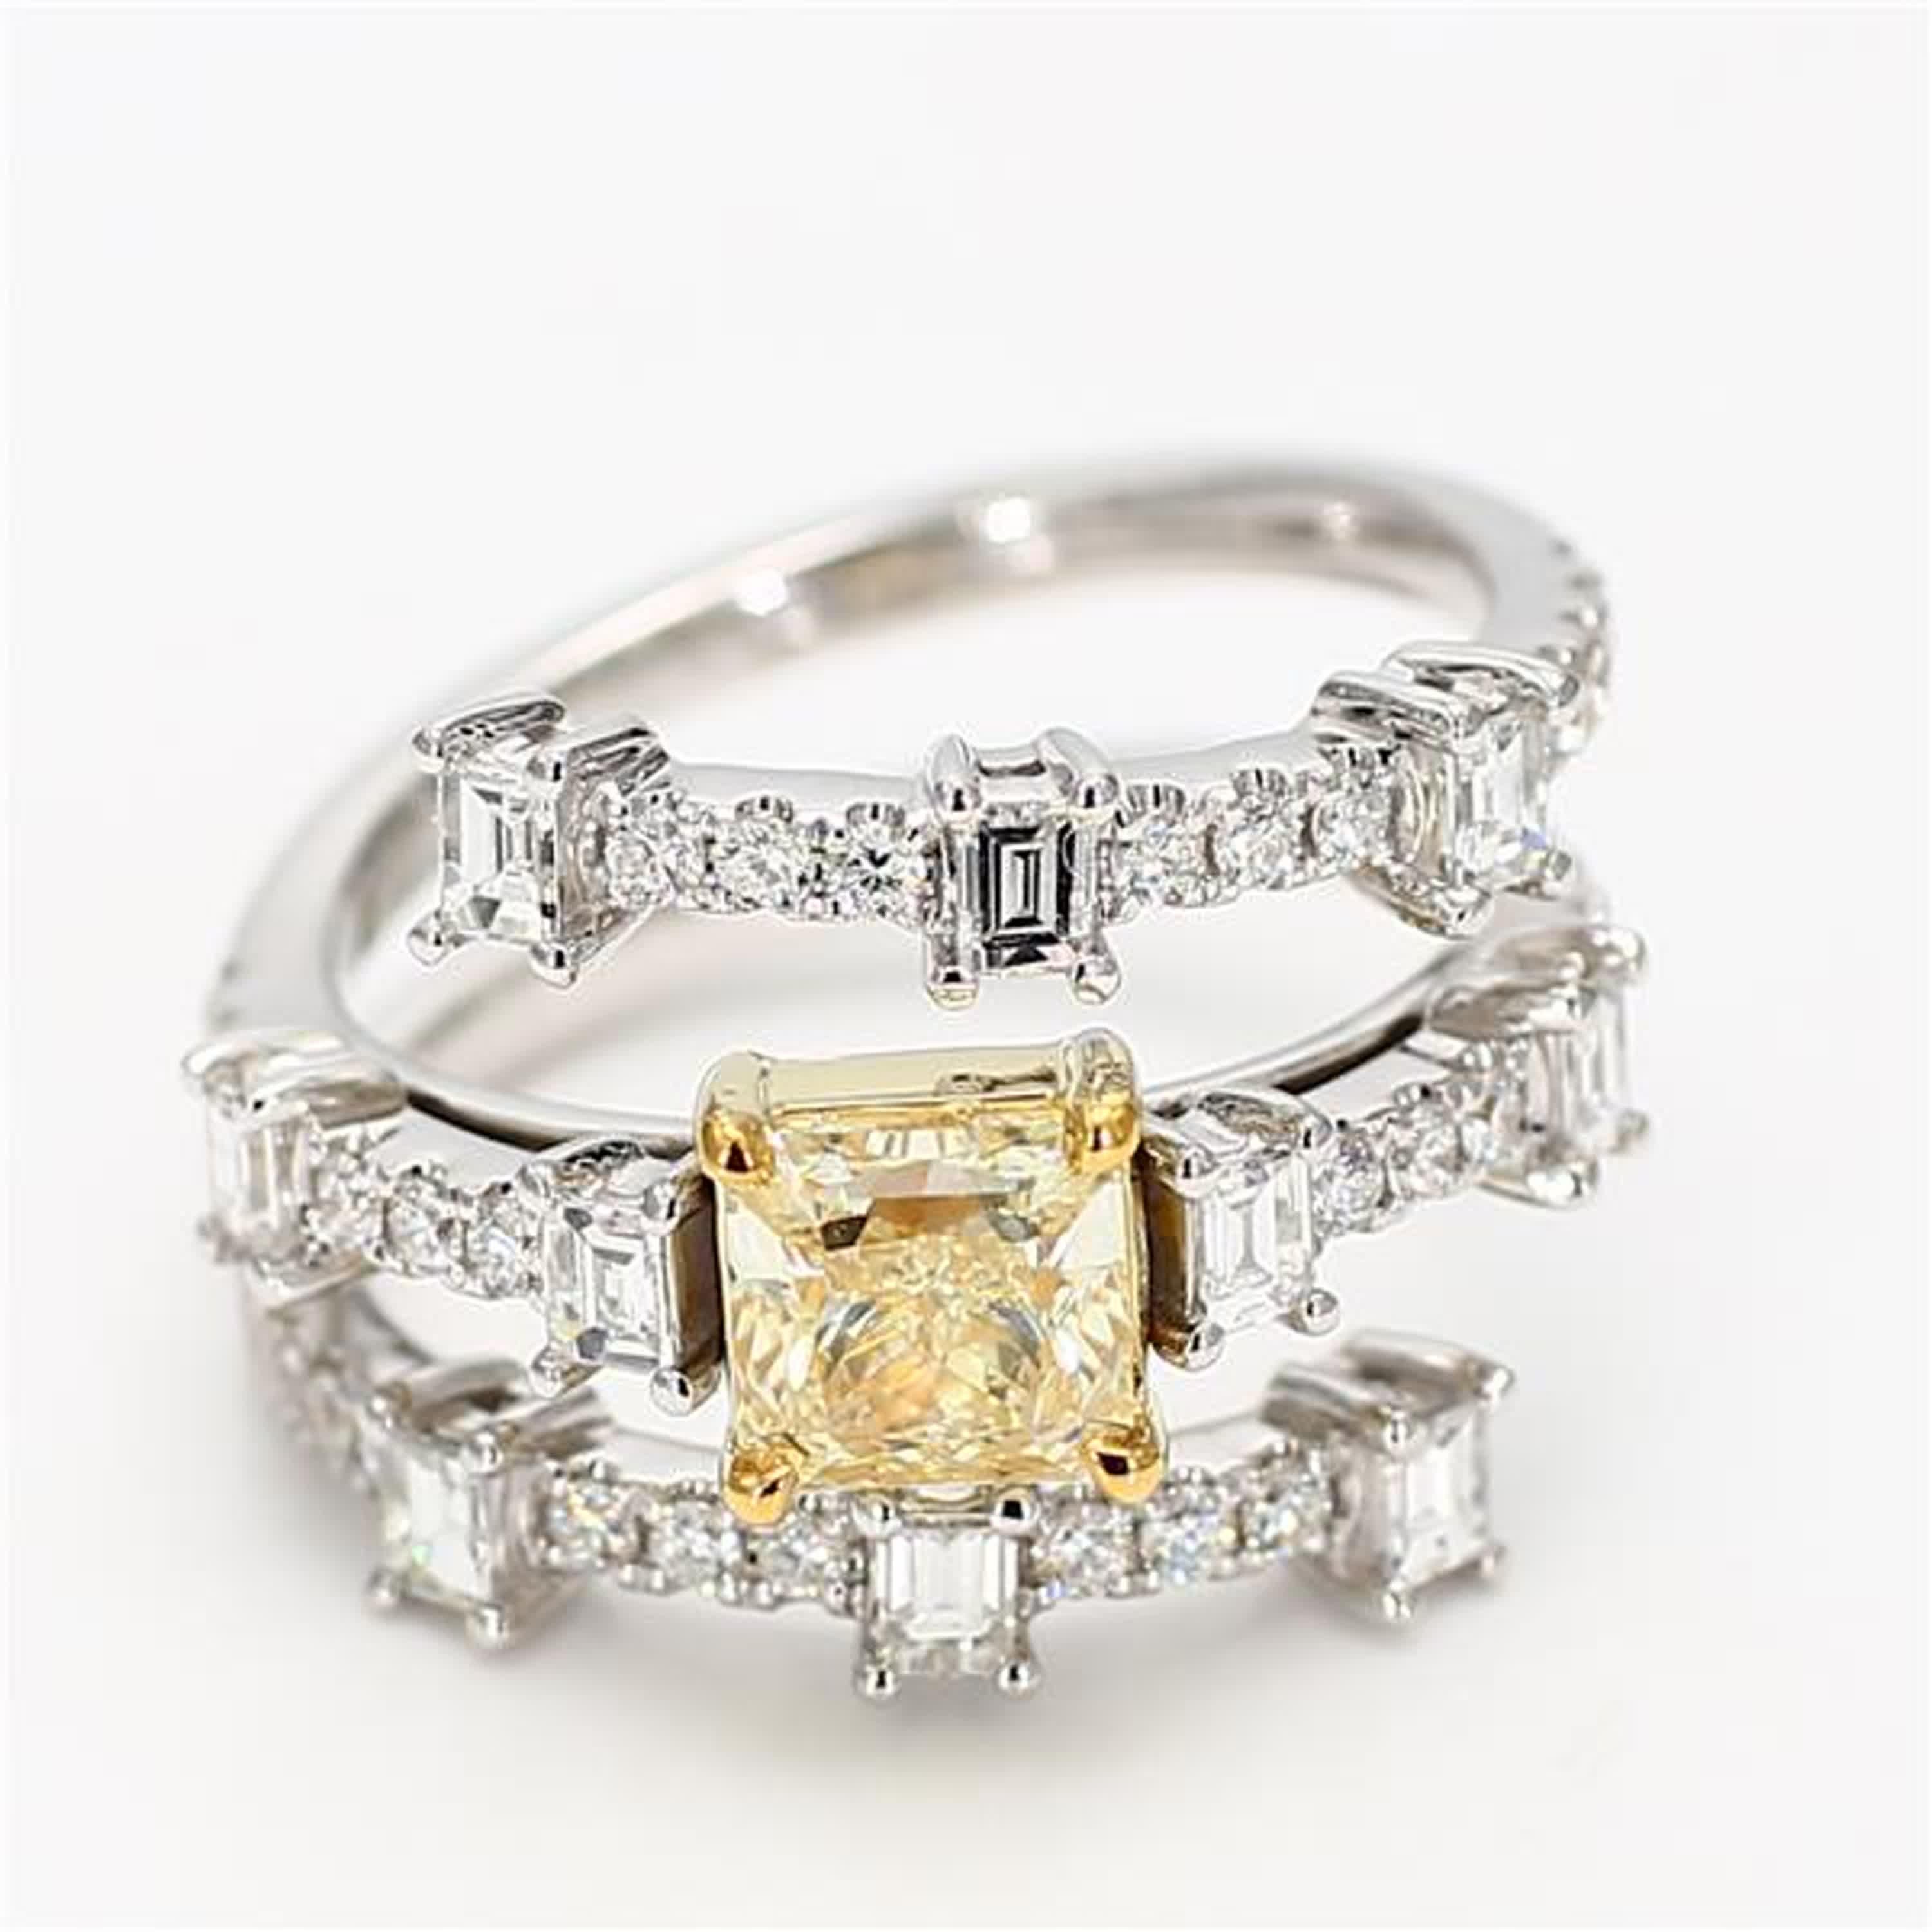 RareGemWorld's classic GIA certified diamond ring. Mounted in a beautiful 18K Yellow and White Gold setting with a natural radiant cut yellow diamond. The yellow diamond is surrounded by natural baguette cut white diamonds and round natural white